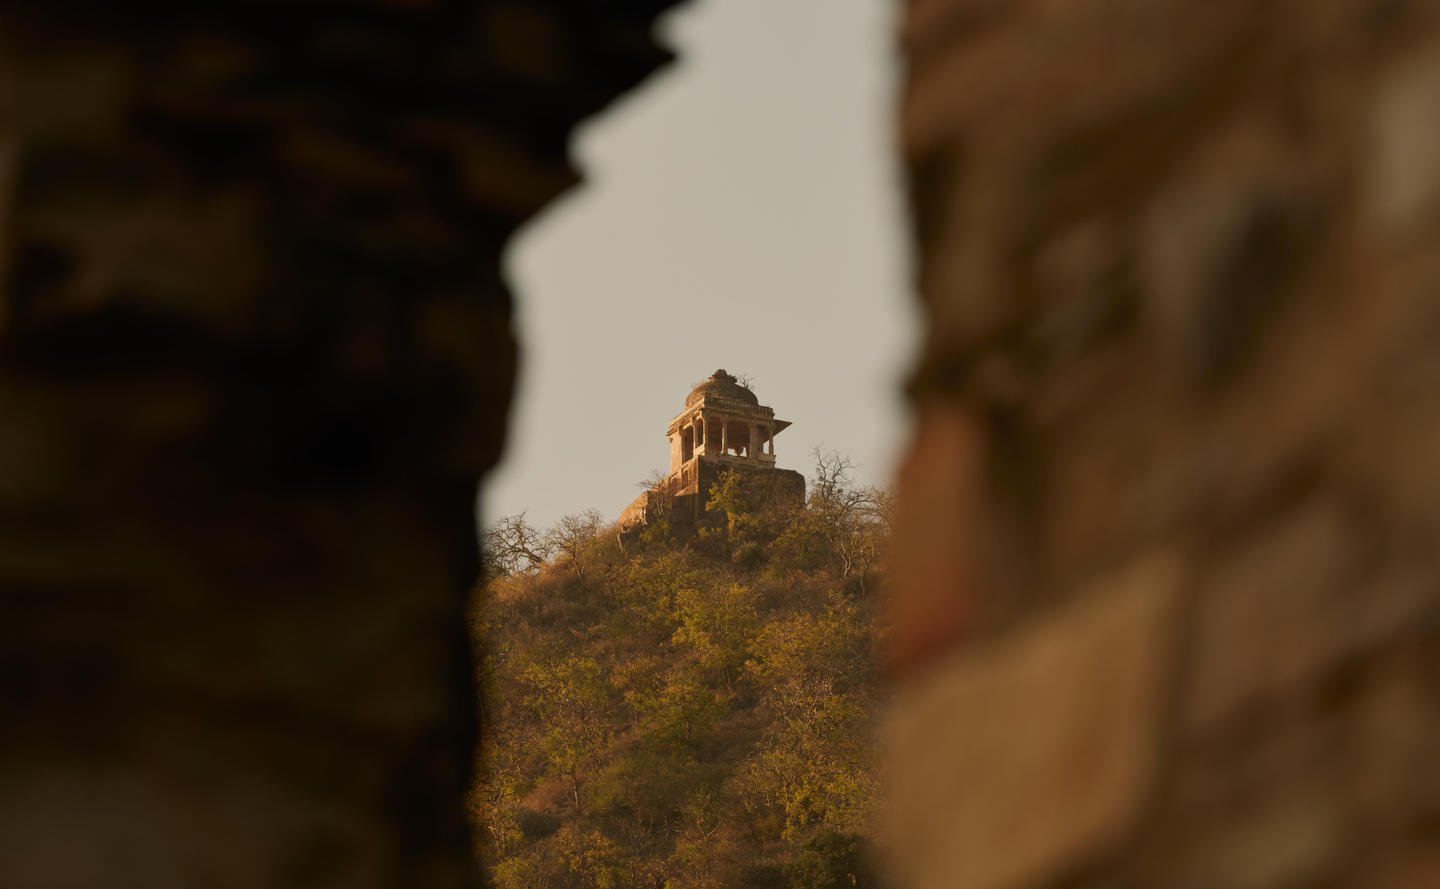 Amanbagh-Experience-Bhangarh Fort, India